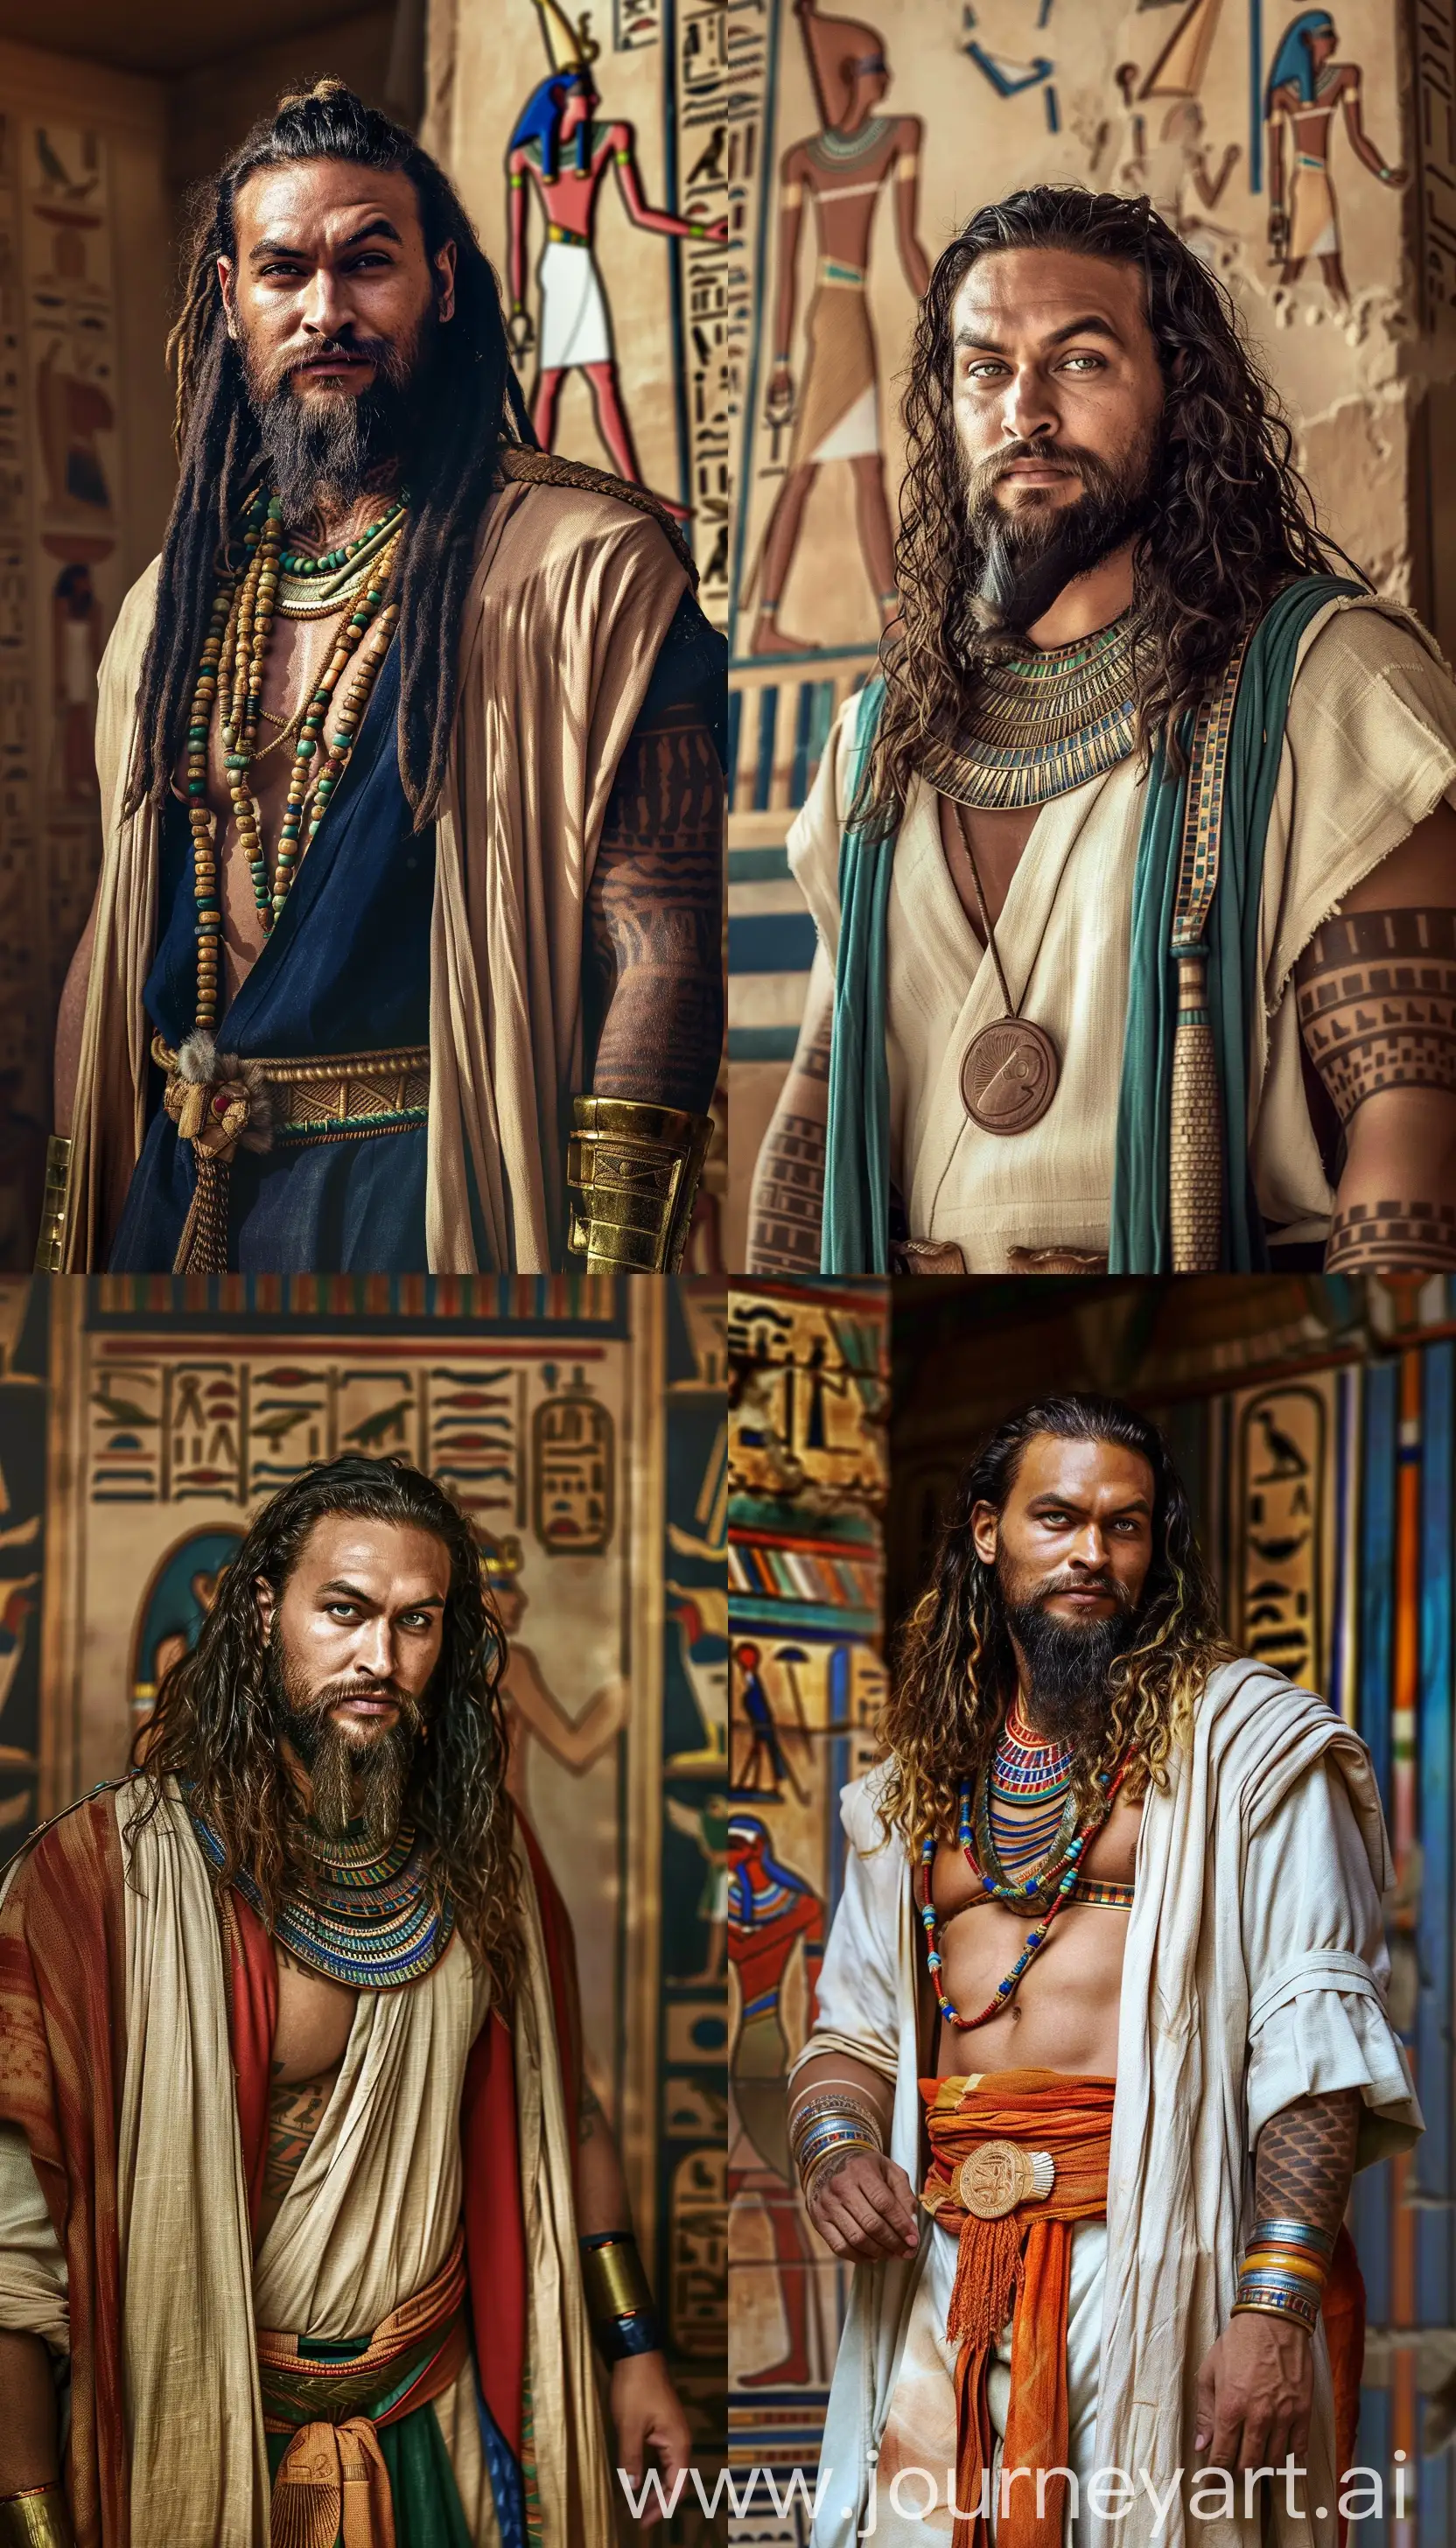  - Realistic photo of jason momoa during Ancient Egypt, dressed in traditional ancient Egyptian attire Style - Hyper-Realistic Historical Photography: Emulating lifelike details and authenticity of an ancient Egyptian setting Setting - An authentic Ancient Egyptian background, capturing the essence of historical Egypt Composition - Featuring Elon Musk adorned in traditional ancient Egyptian clothing, reflecting the attire of the era Camera Model - Utilizing a professional-grade camera known for its ability to capture fine details and realism, such as the Canon EOS R5, to convey lifelike and detailed imagery Additional Info - The image aims to depict Elon Musk realistically in Ancient Egypt, emphasizing authenticity in attire, setting, and the ambiance of historical Egypt, merging realism with the historical context of Ancient Egyptian civilization --ar 4:7